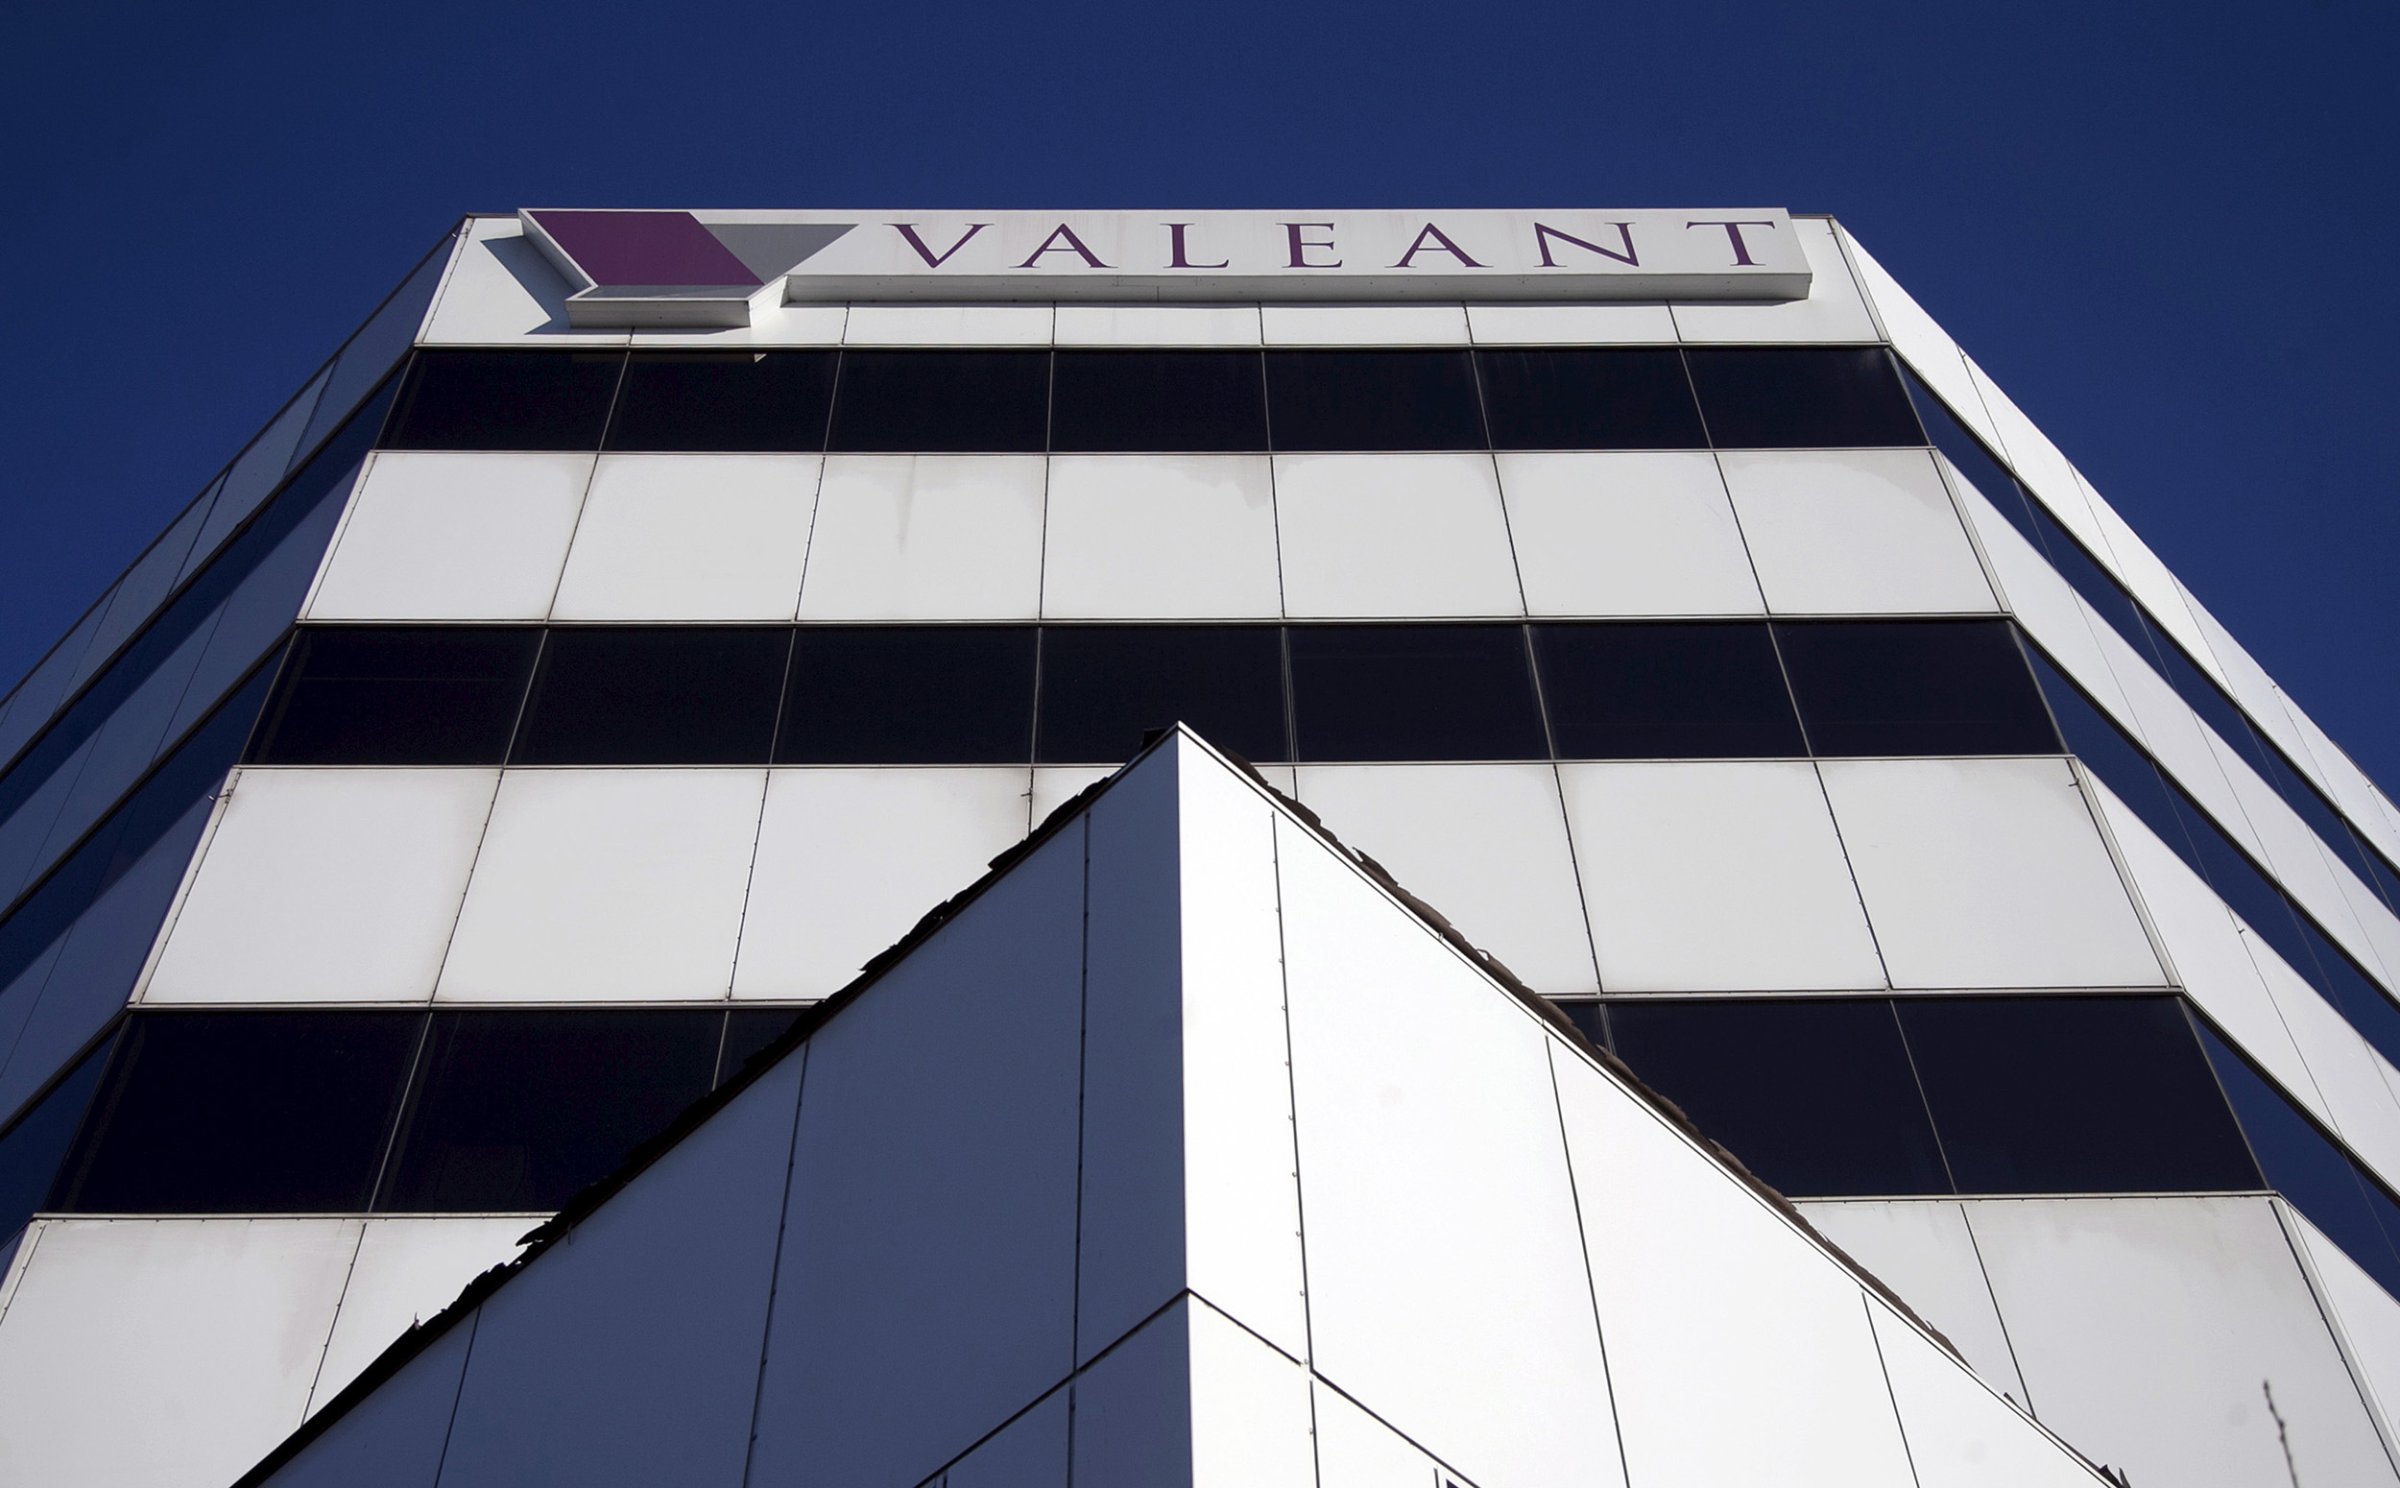 The headquarters of Valeant Pharmaceuticals International Inc., seen in Laval, Quebec on Nov. 9 2015.